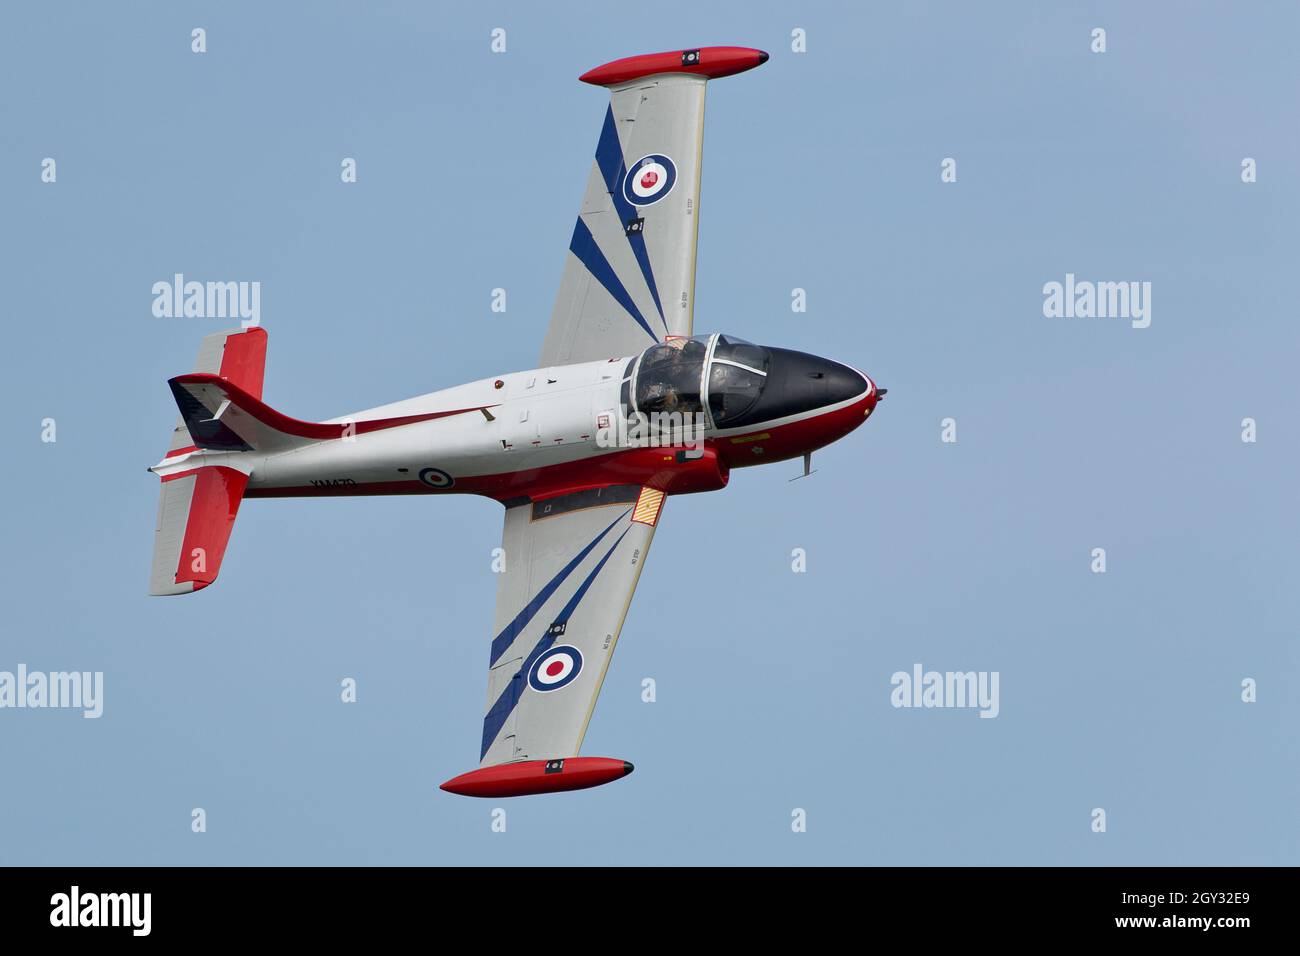 Royal Air Force RAF Jet Provost Trainer at Abingdon Airshow Stock Photo